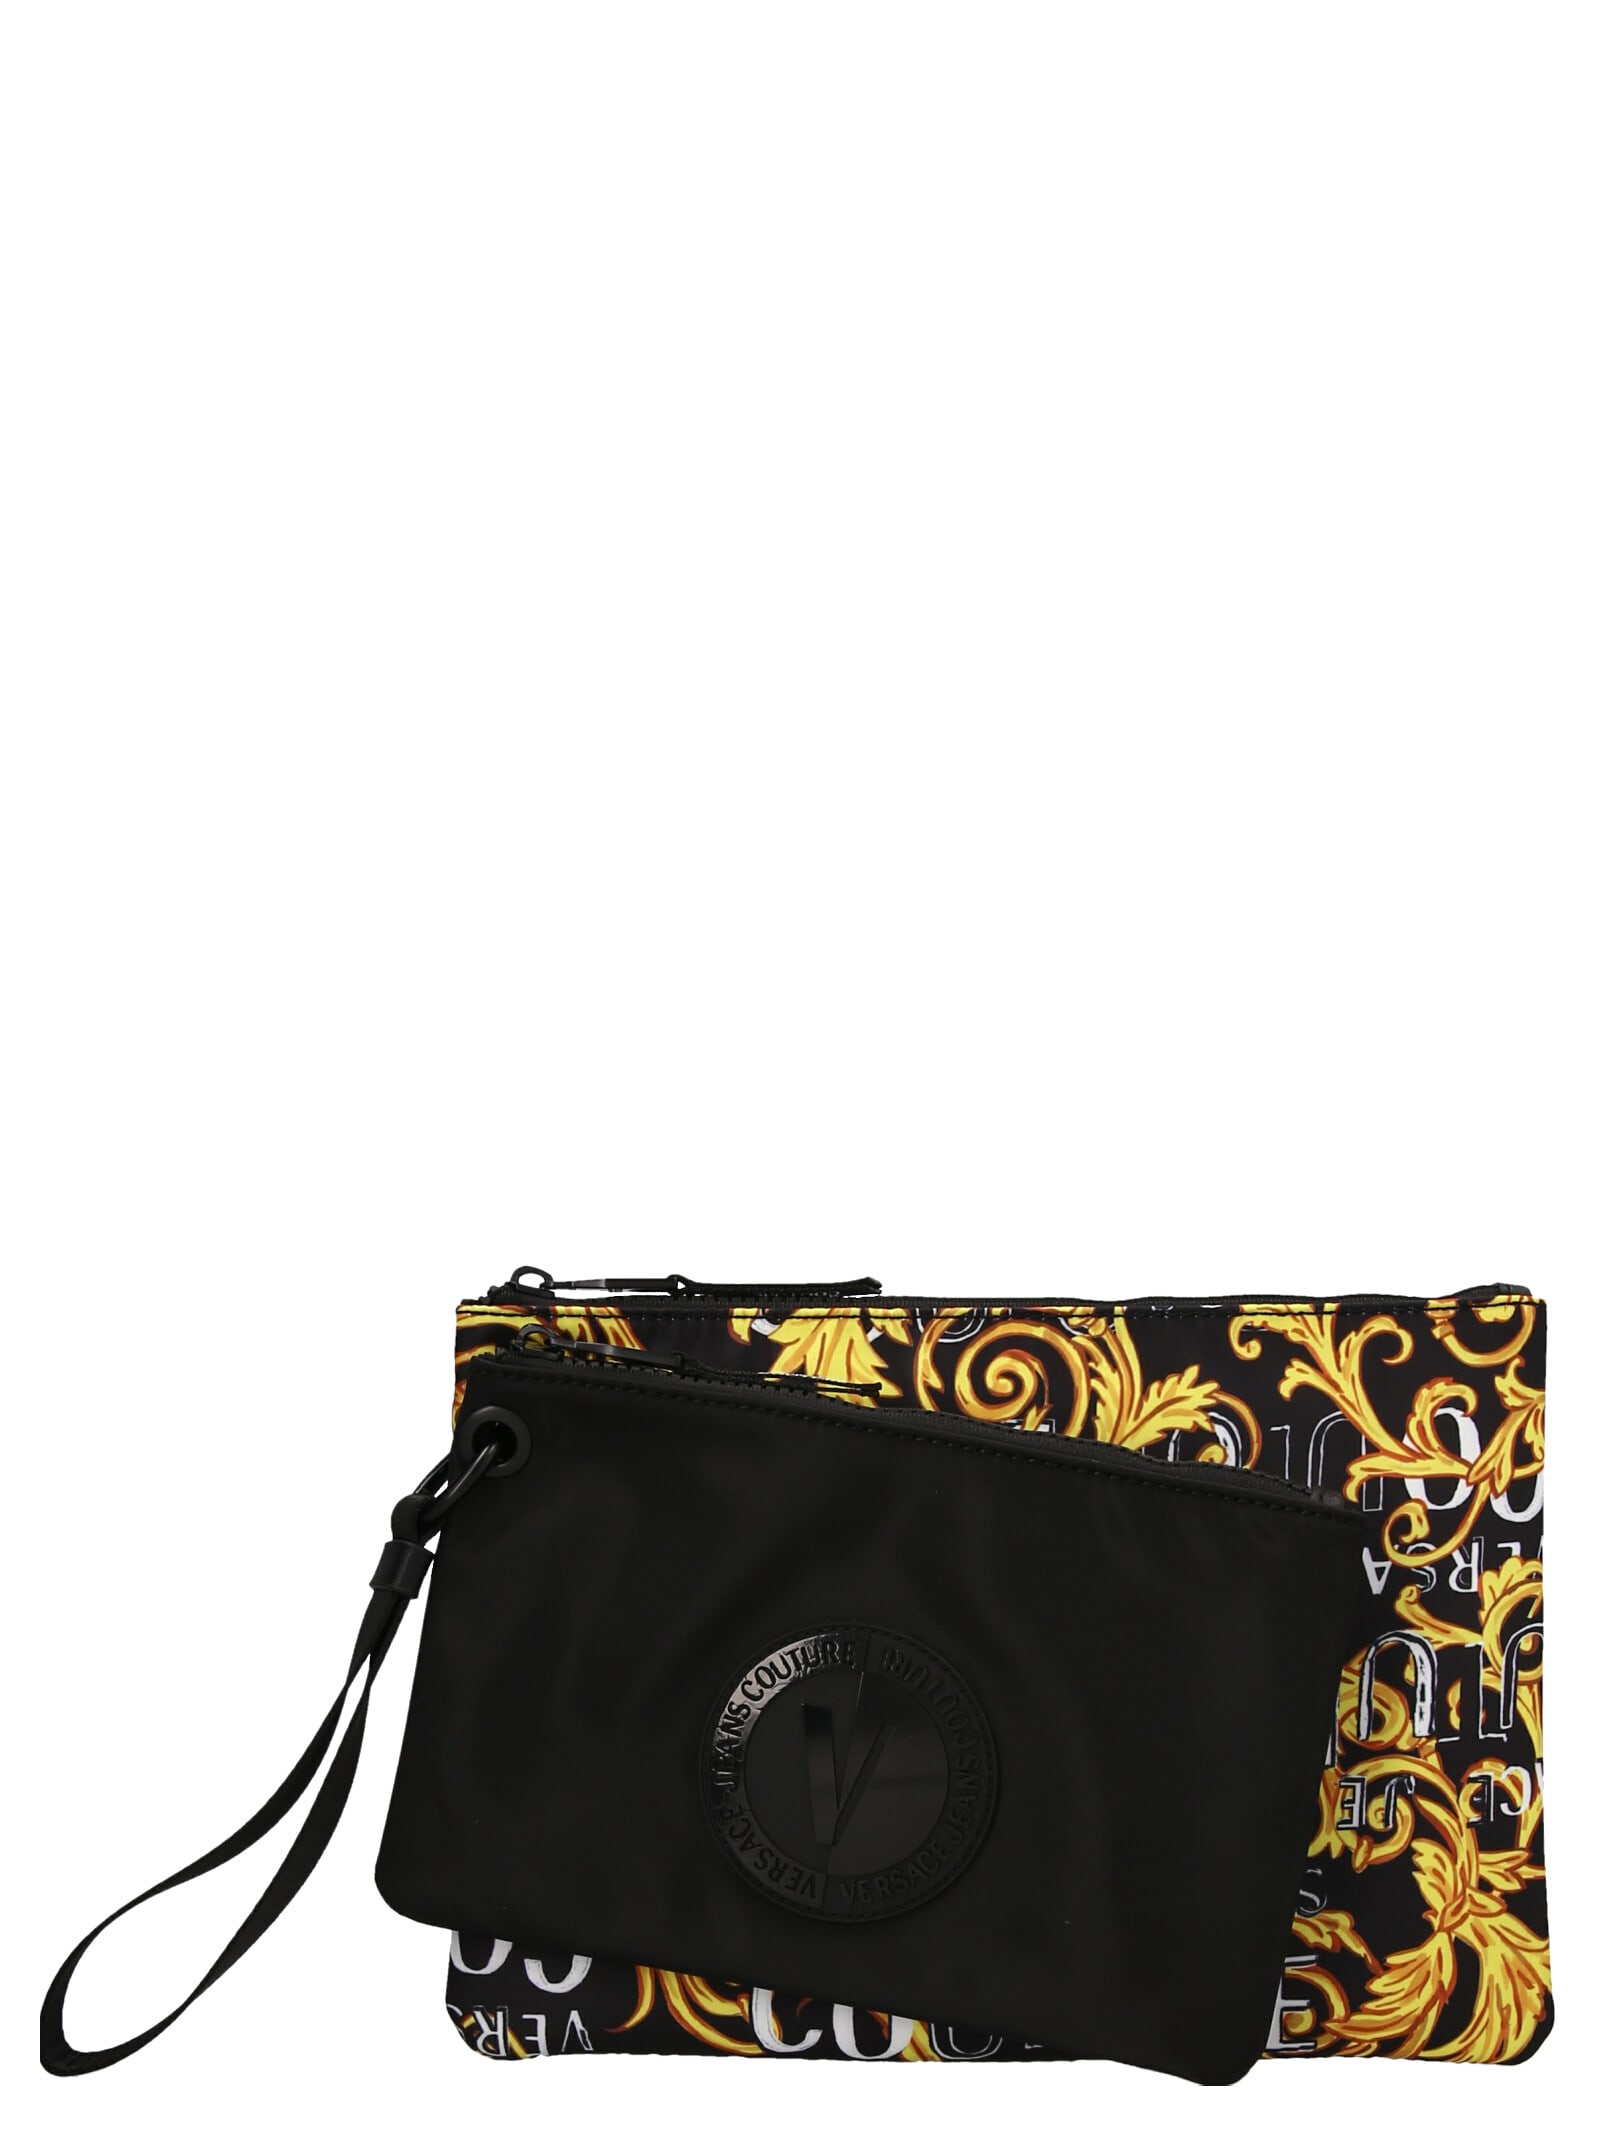 VERSACE JEANS COUTURE BAROCCO LOGO CLUTCH BAG